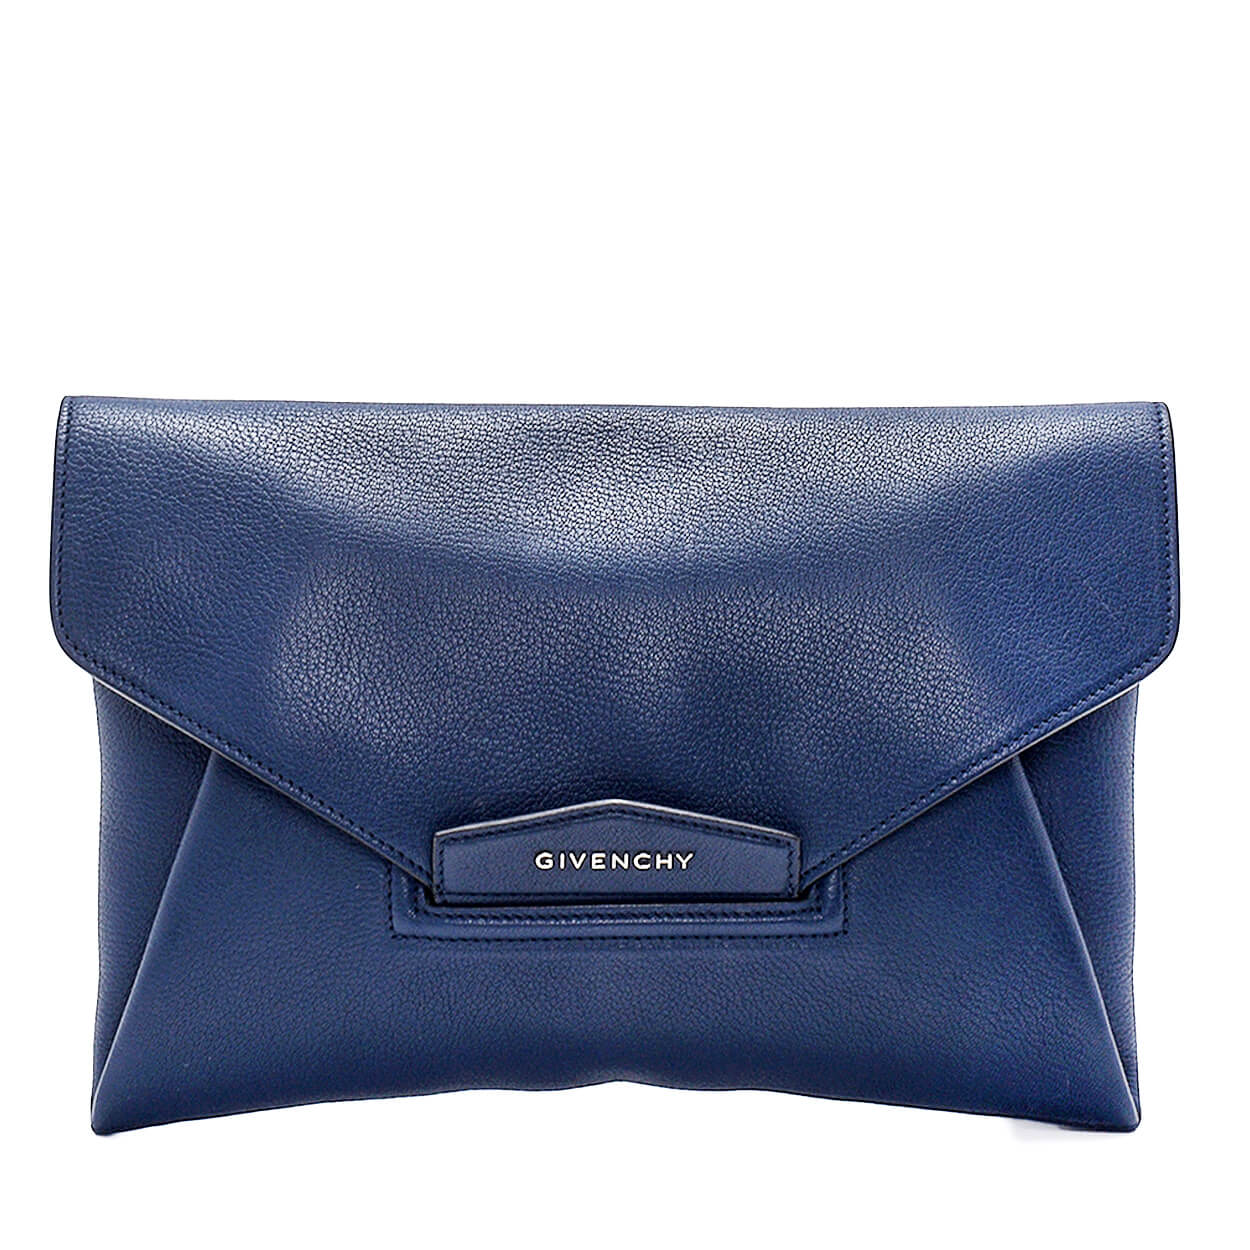 GIVENCHY - Navy Leather Envelope Clutch